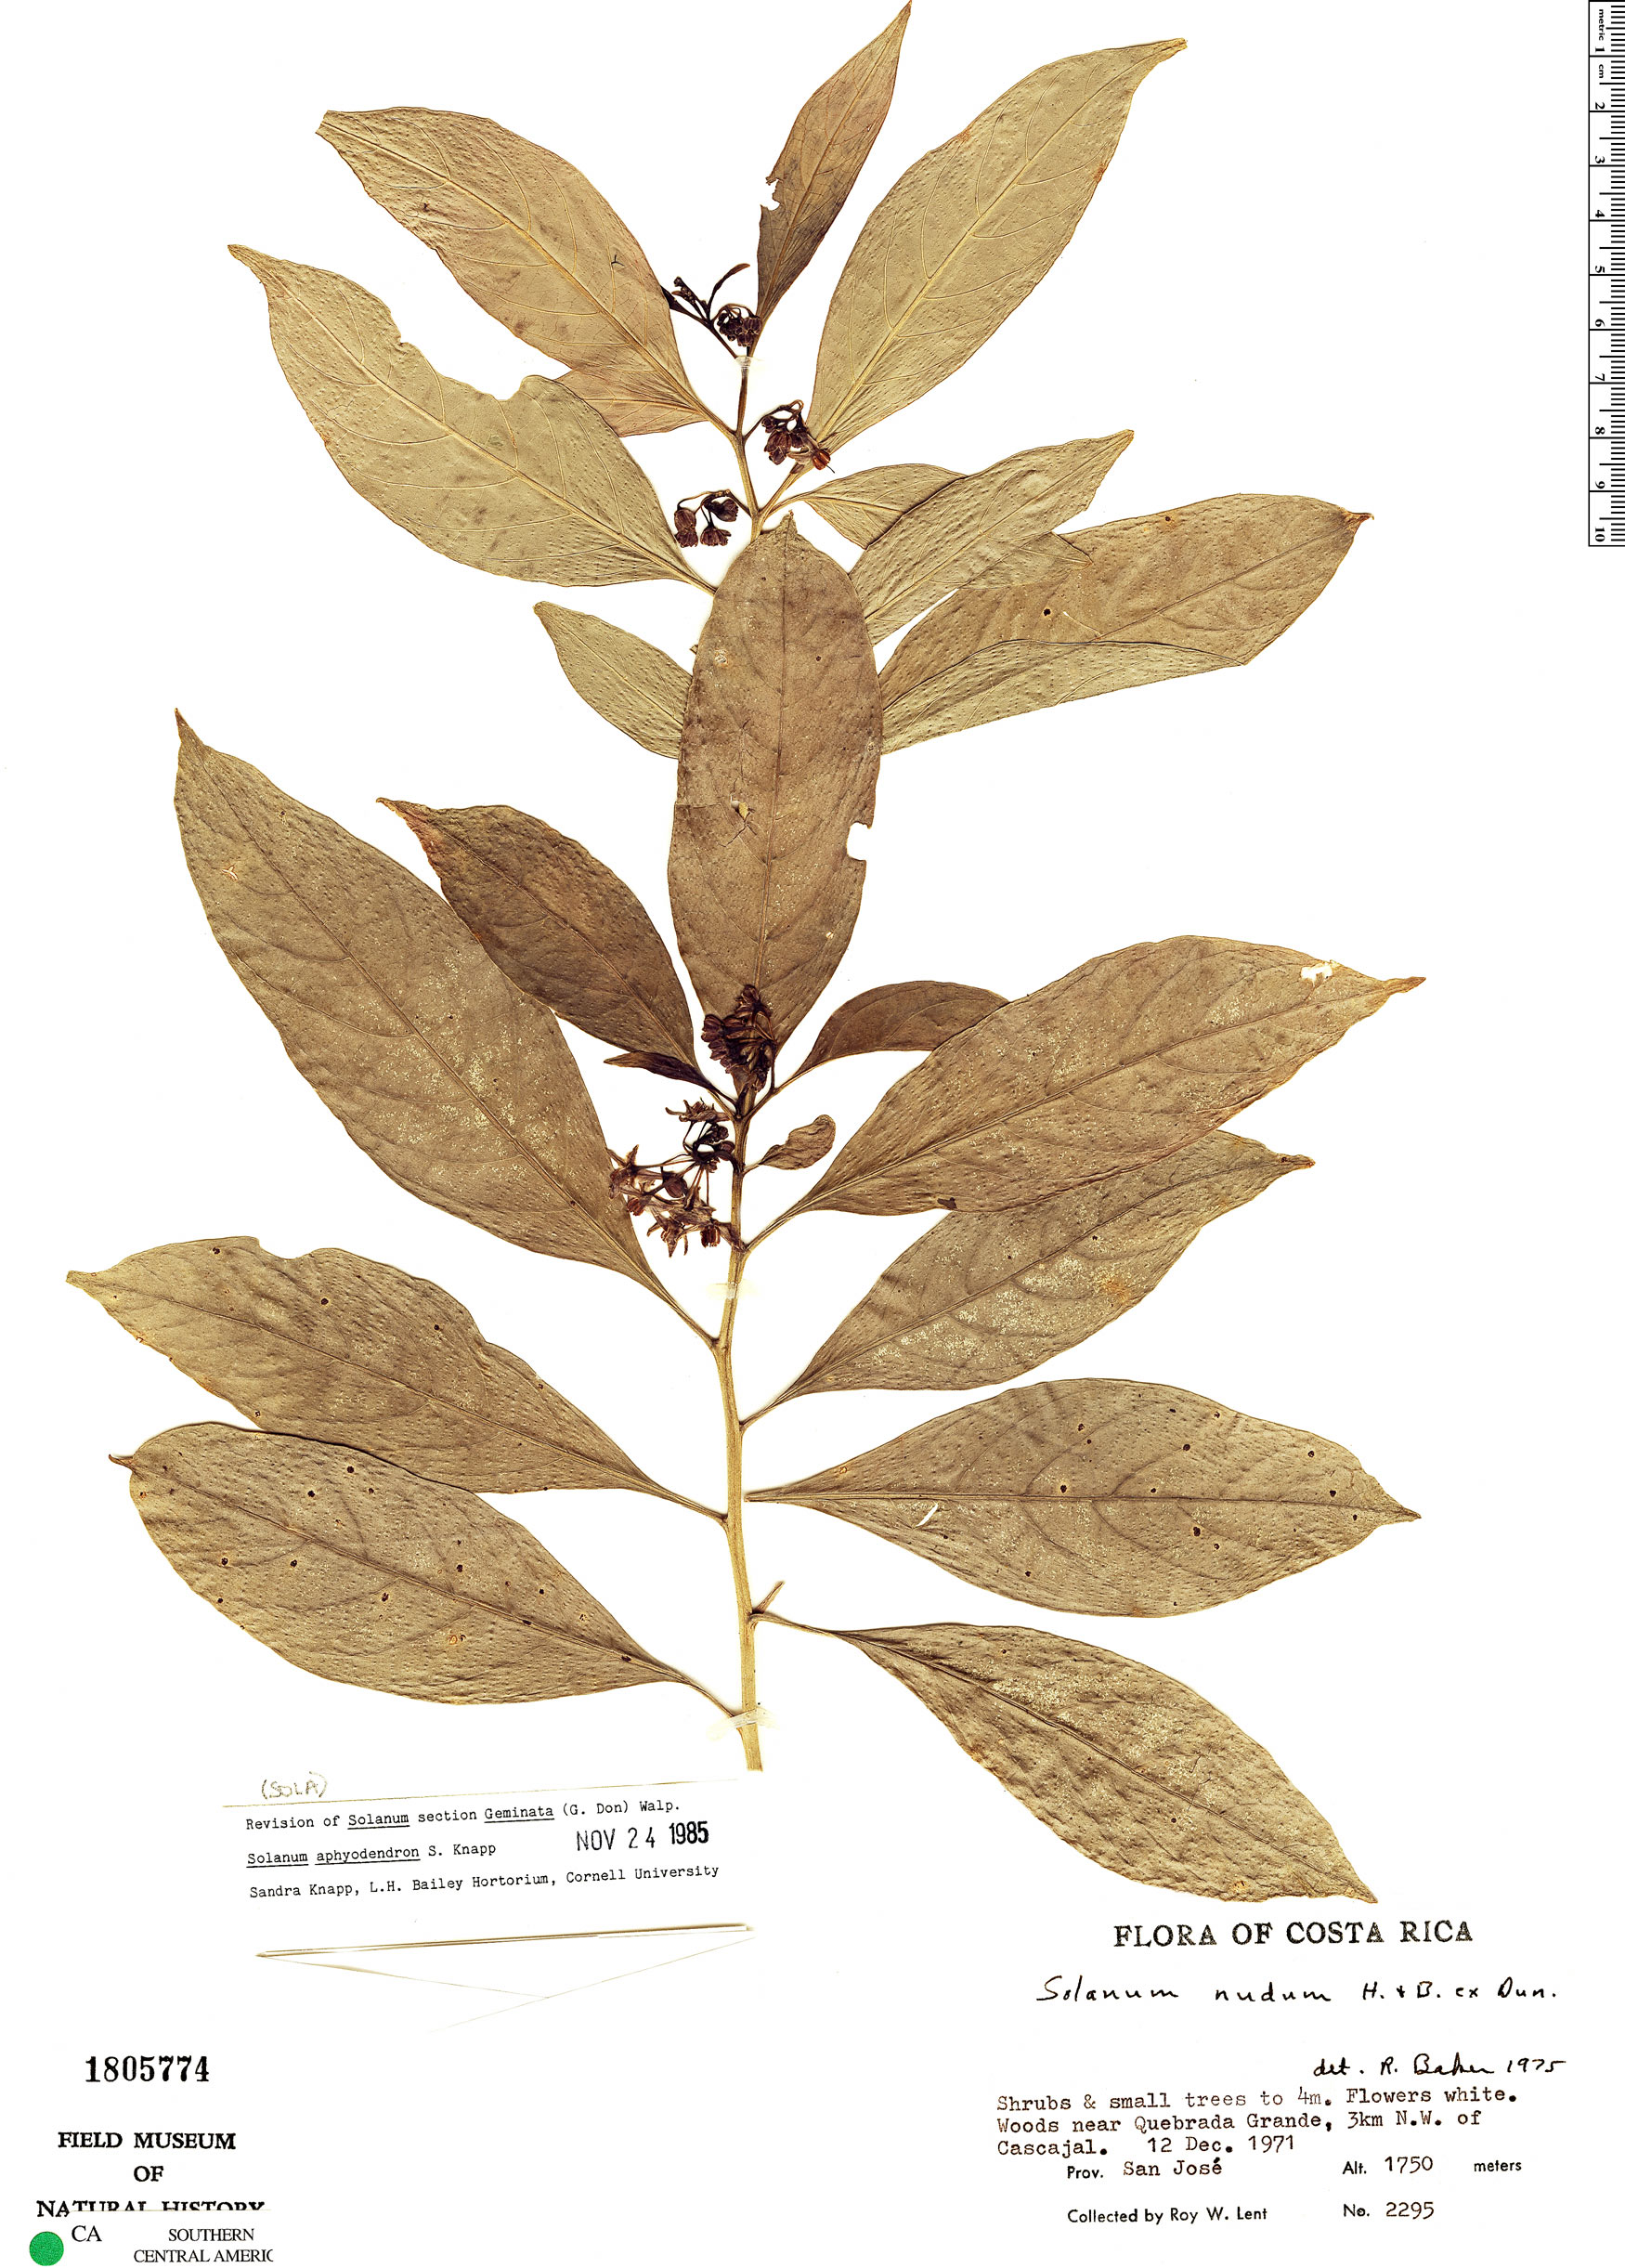 Solanum aphyodendron image